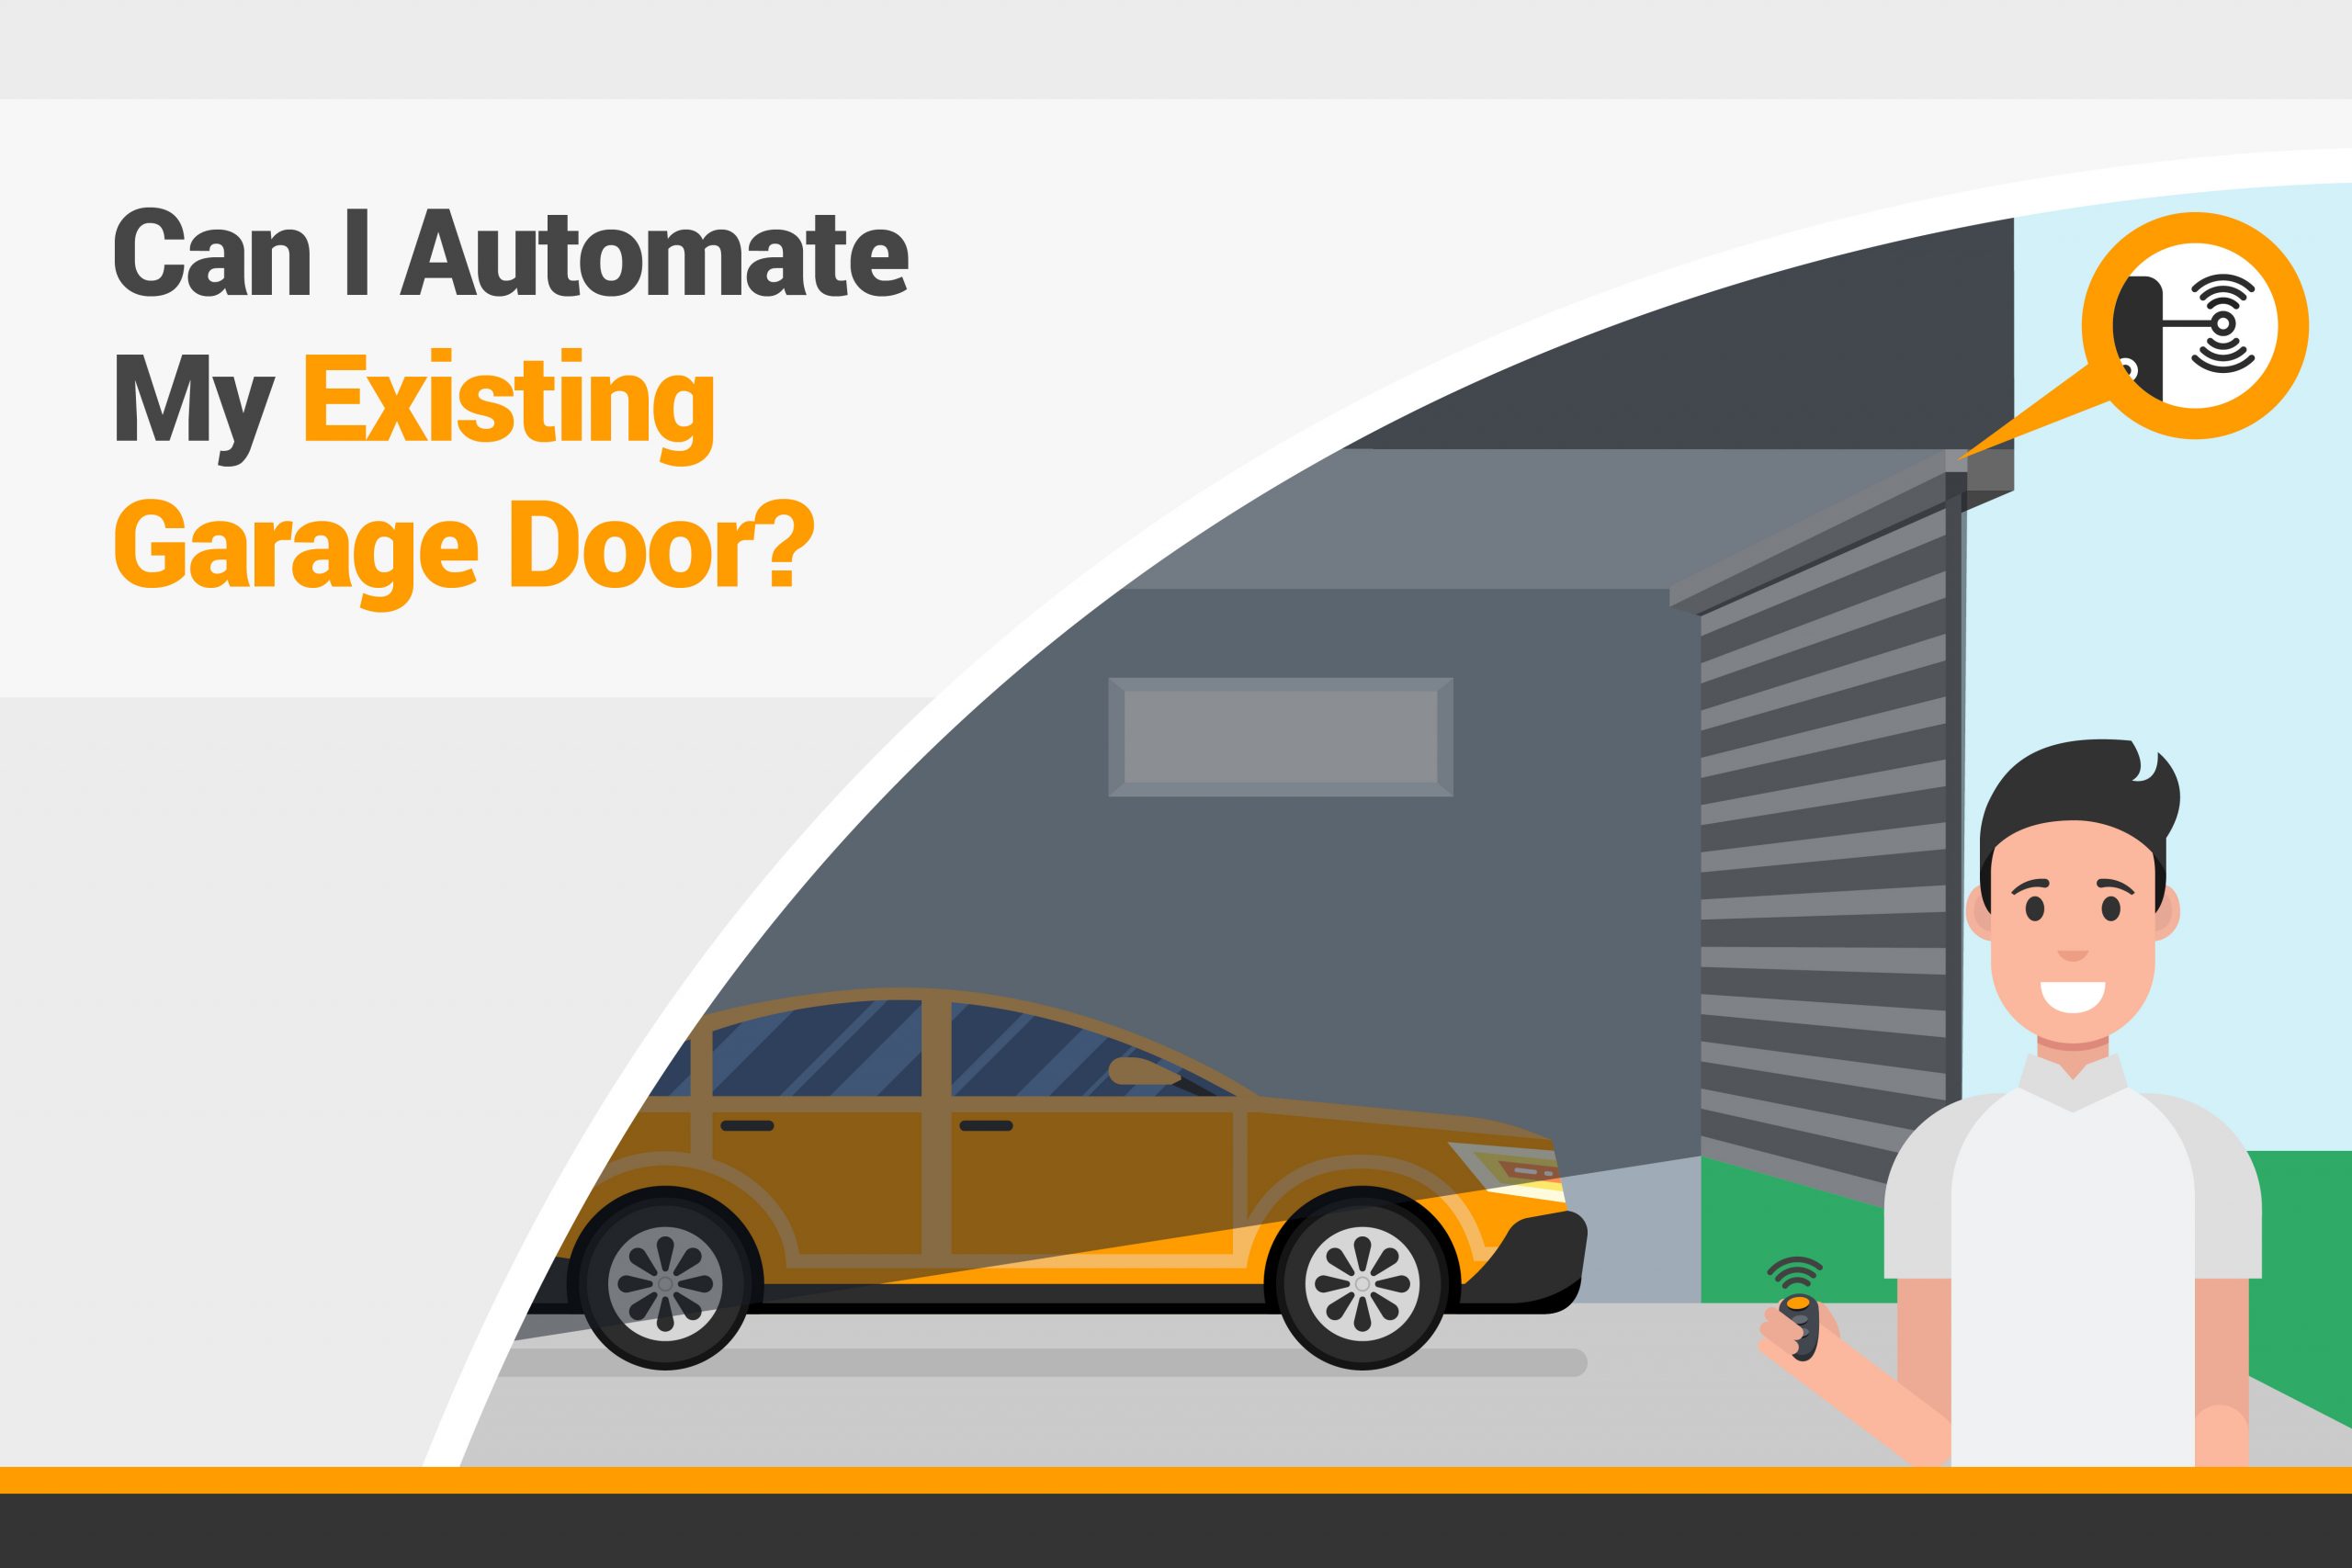 Can I automate my existing manual garage door?